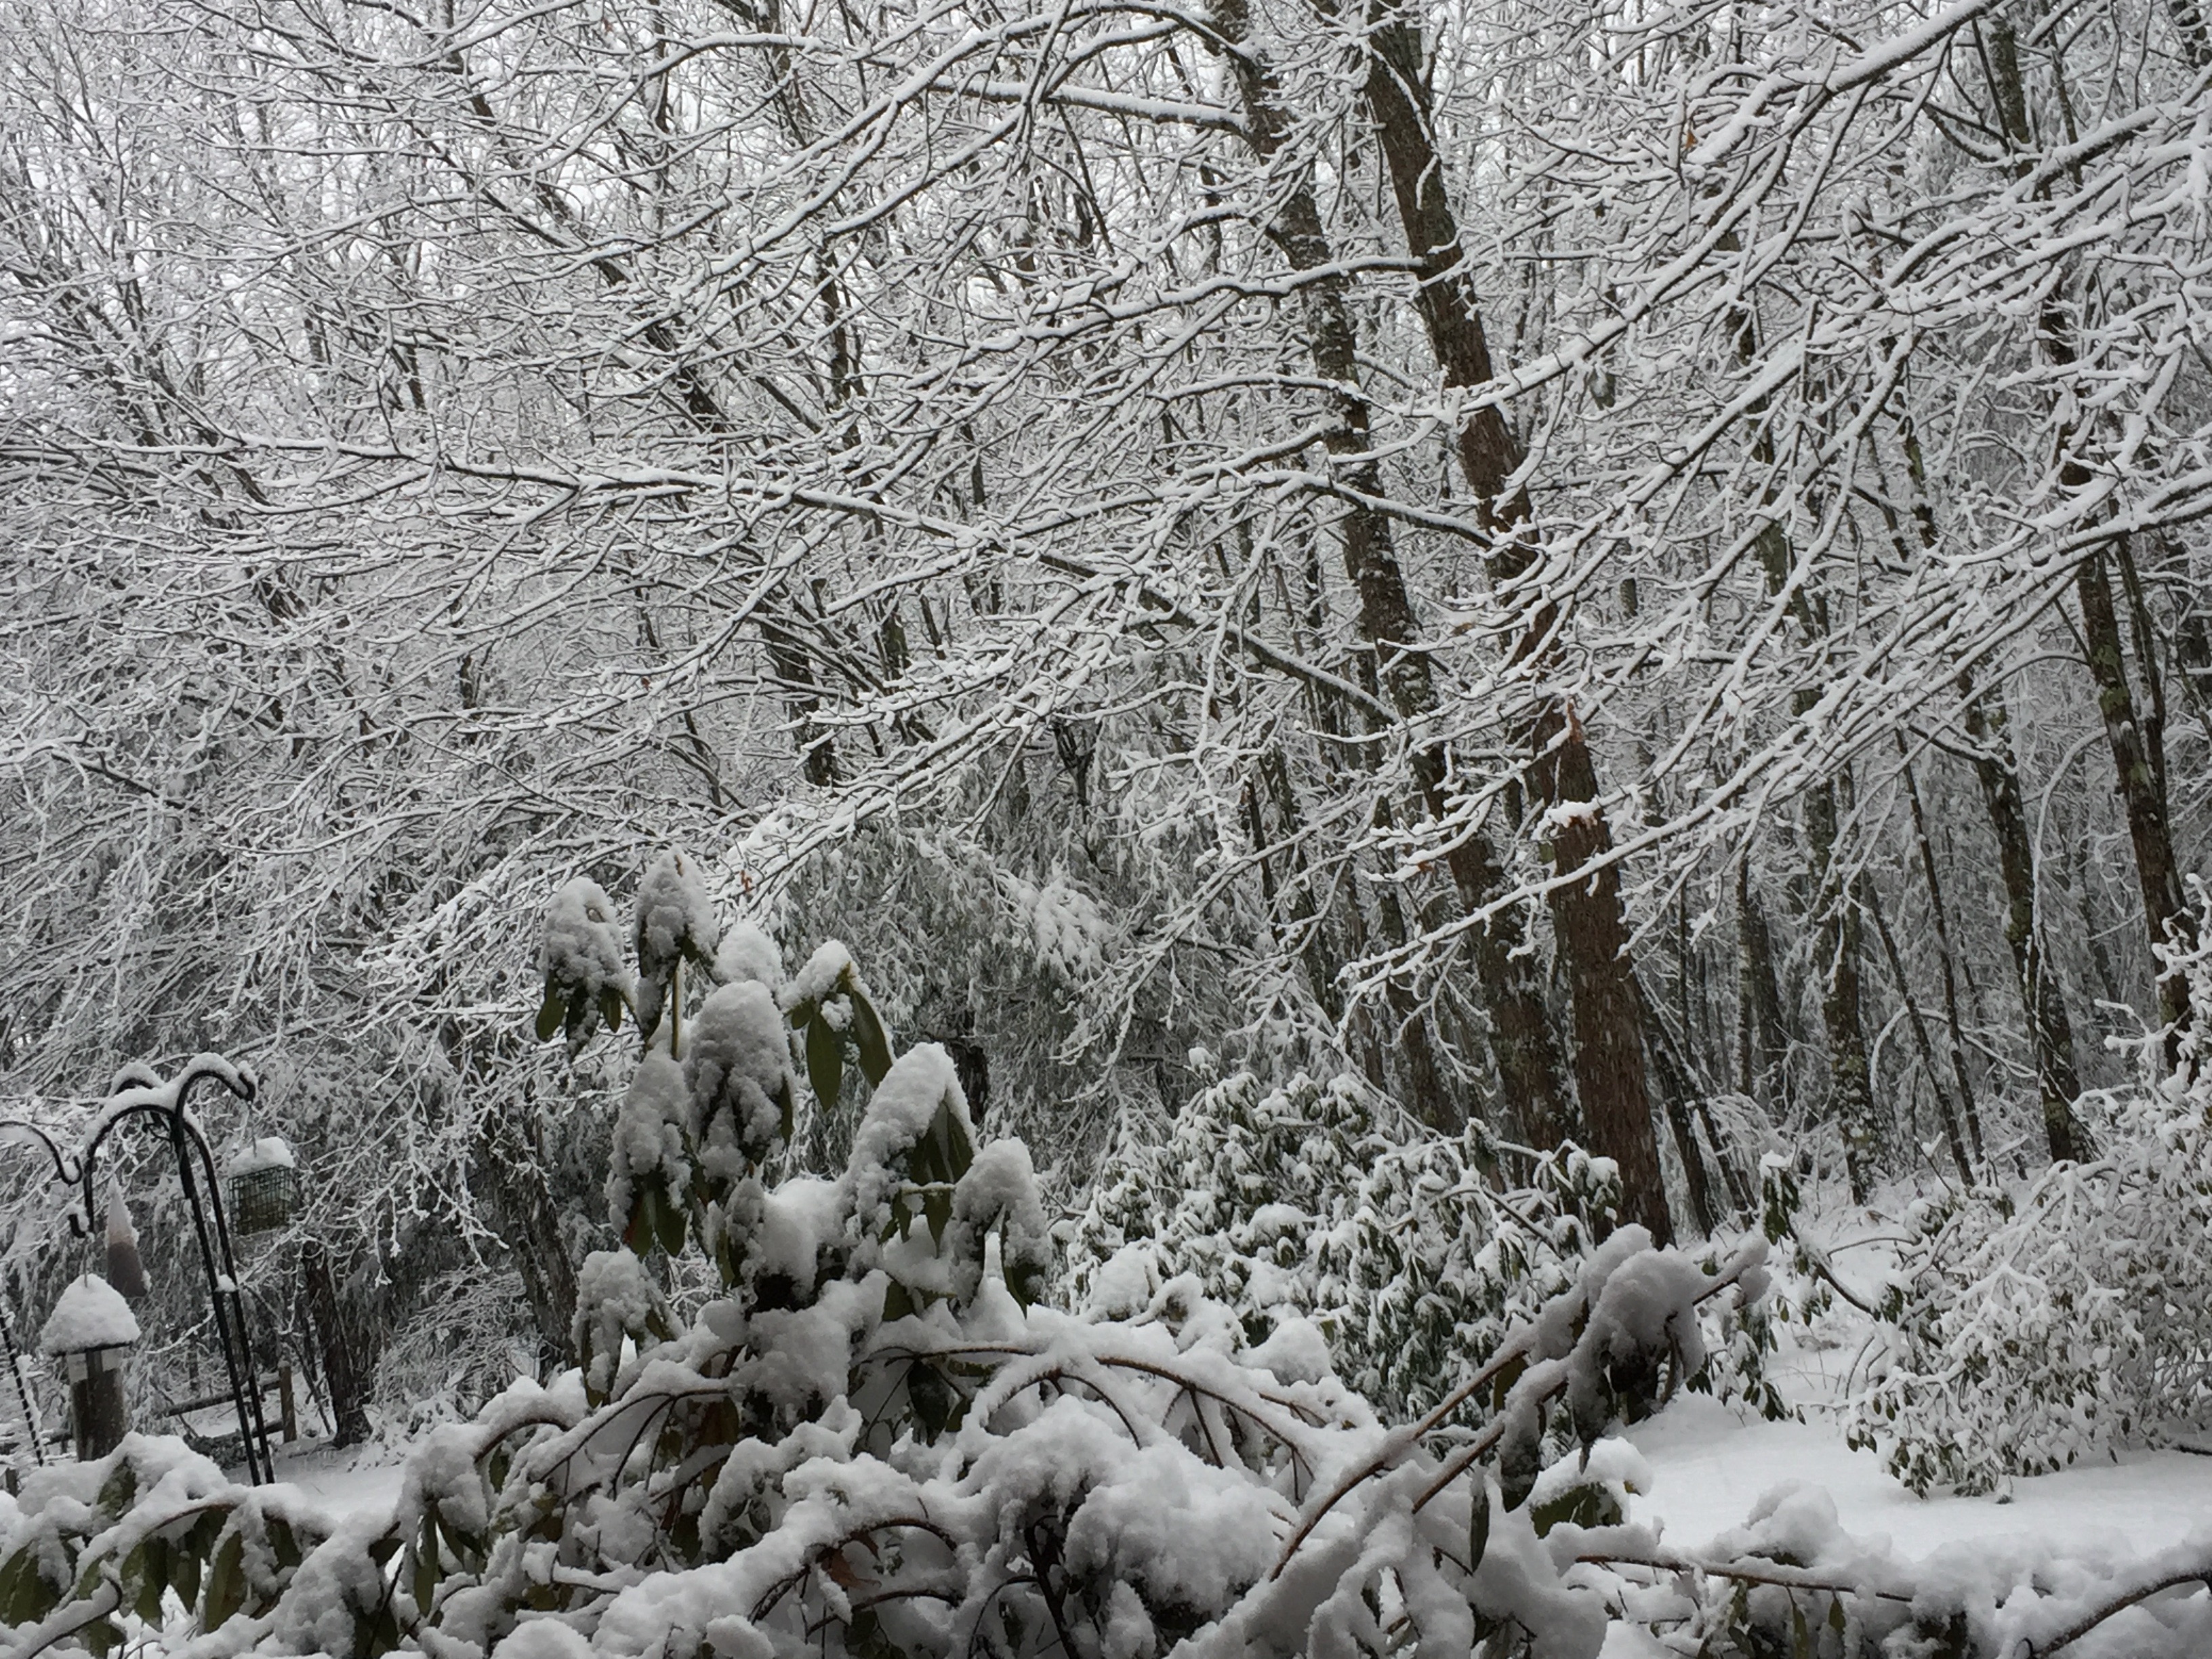 An image focusing on the oak trees at the edge of the lawn, each limb and twig outlined in snow.